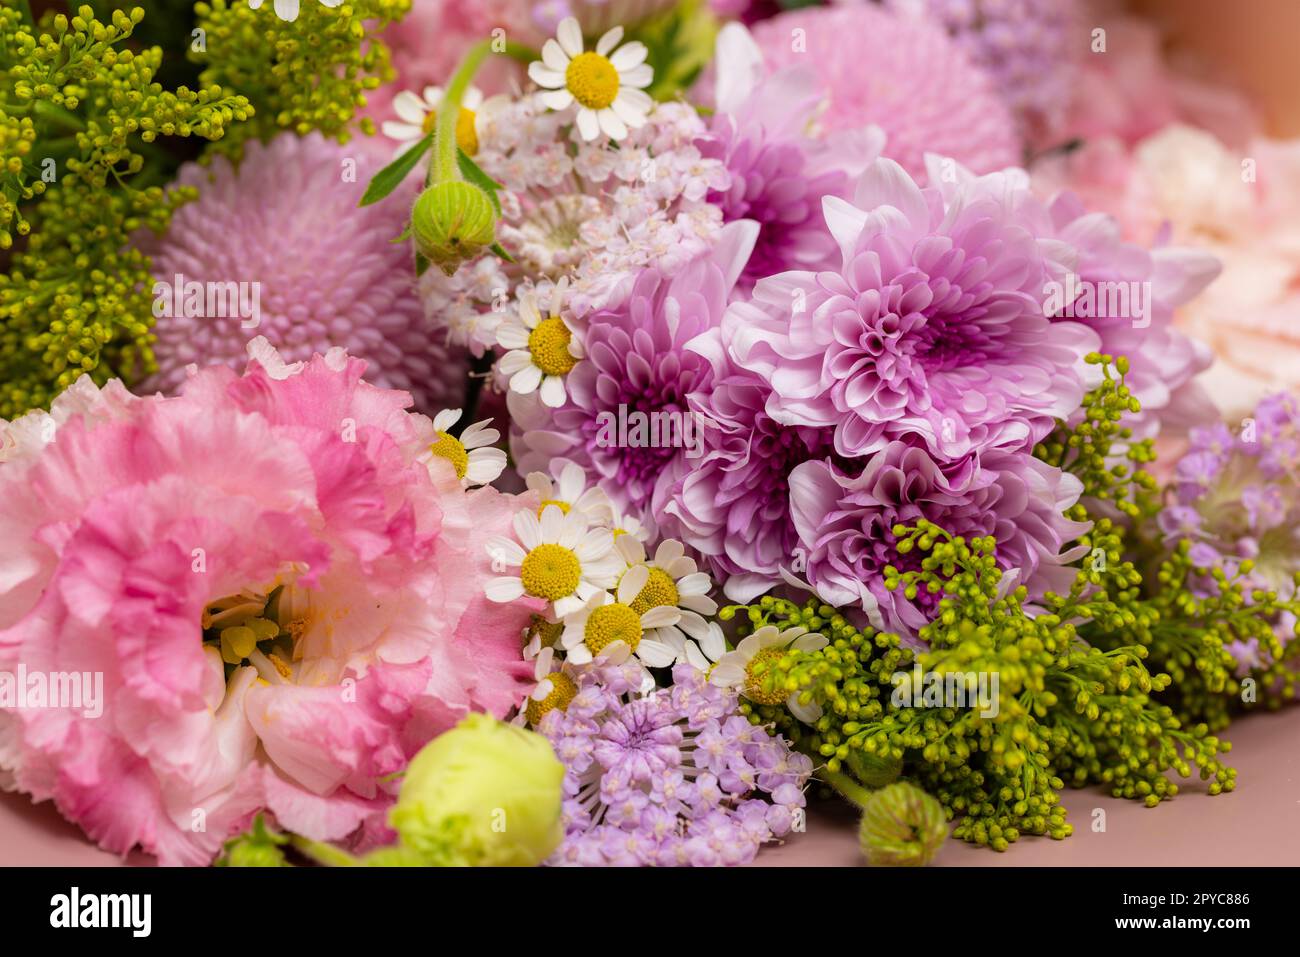 Variety of purple flower in a box Stock Photo